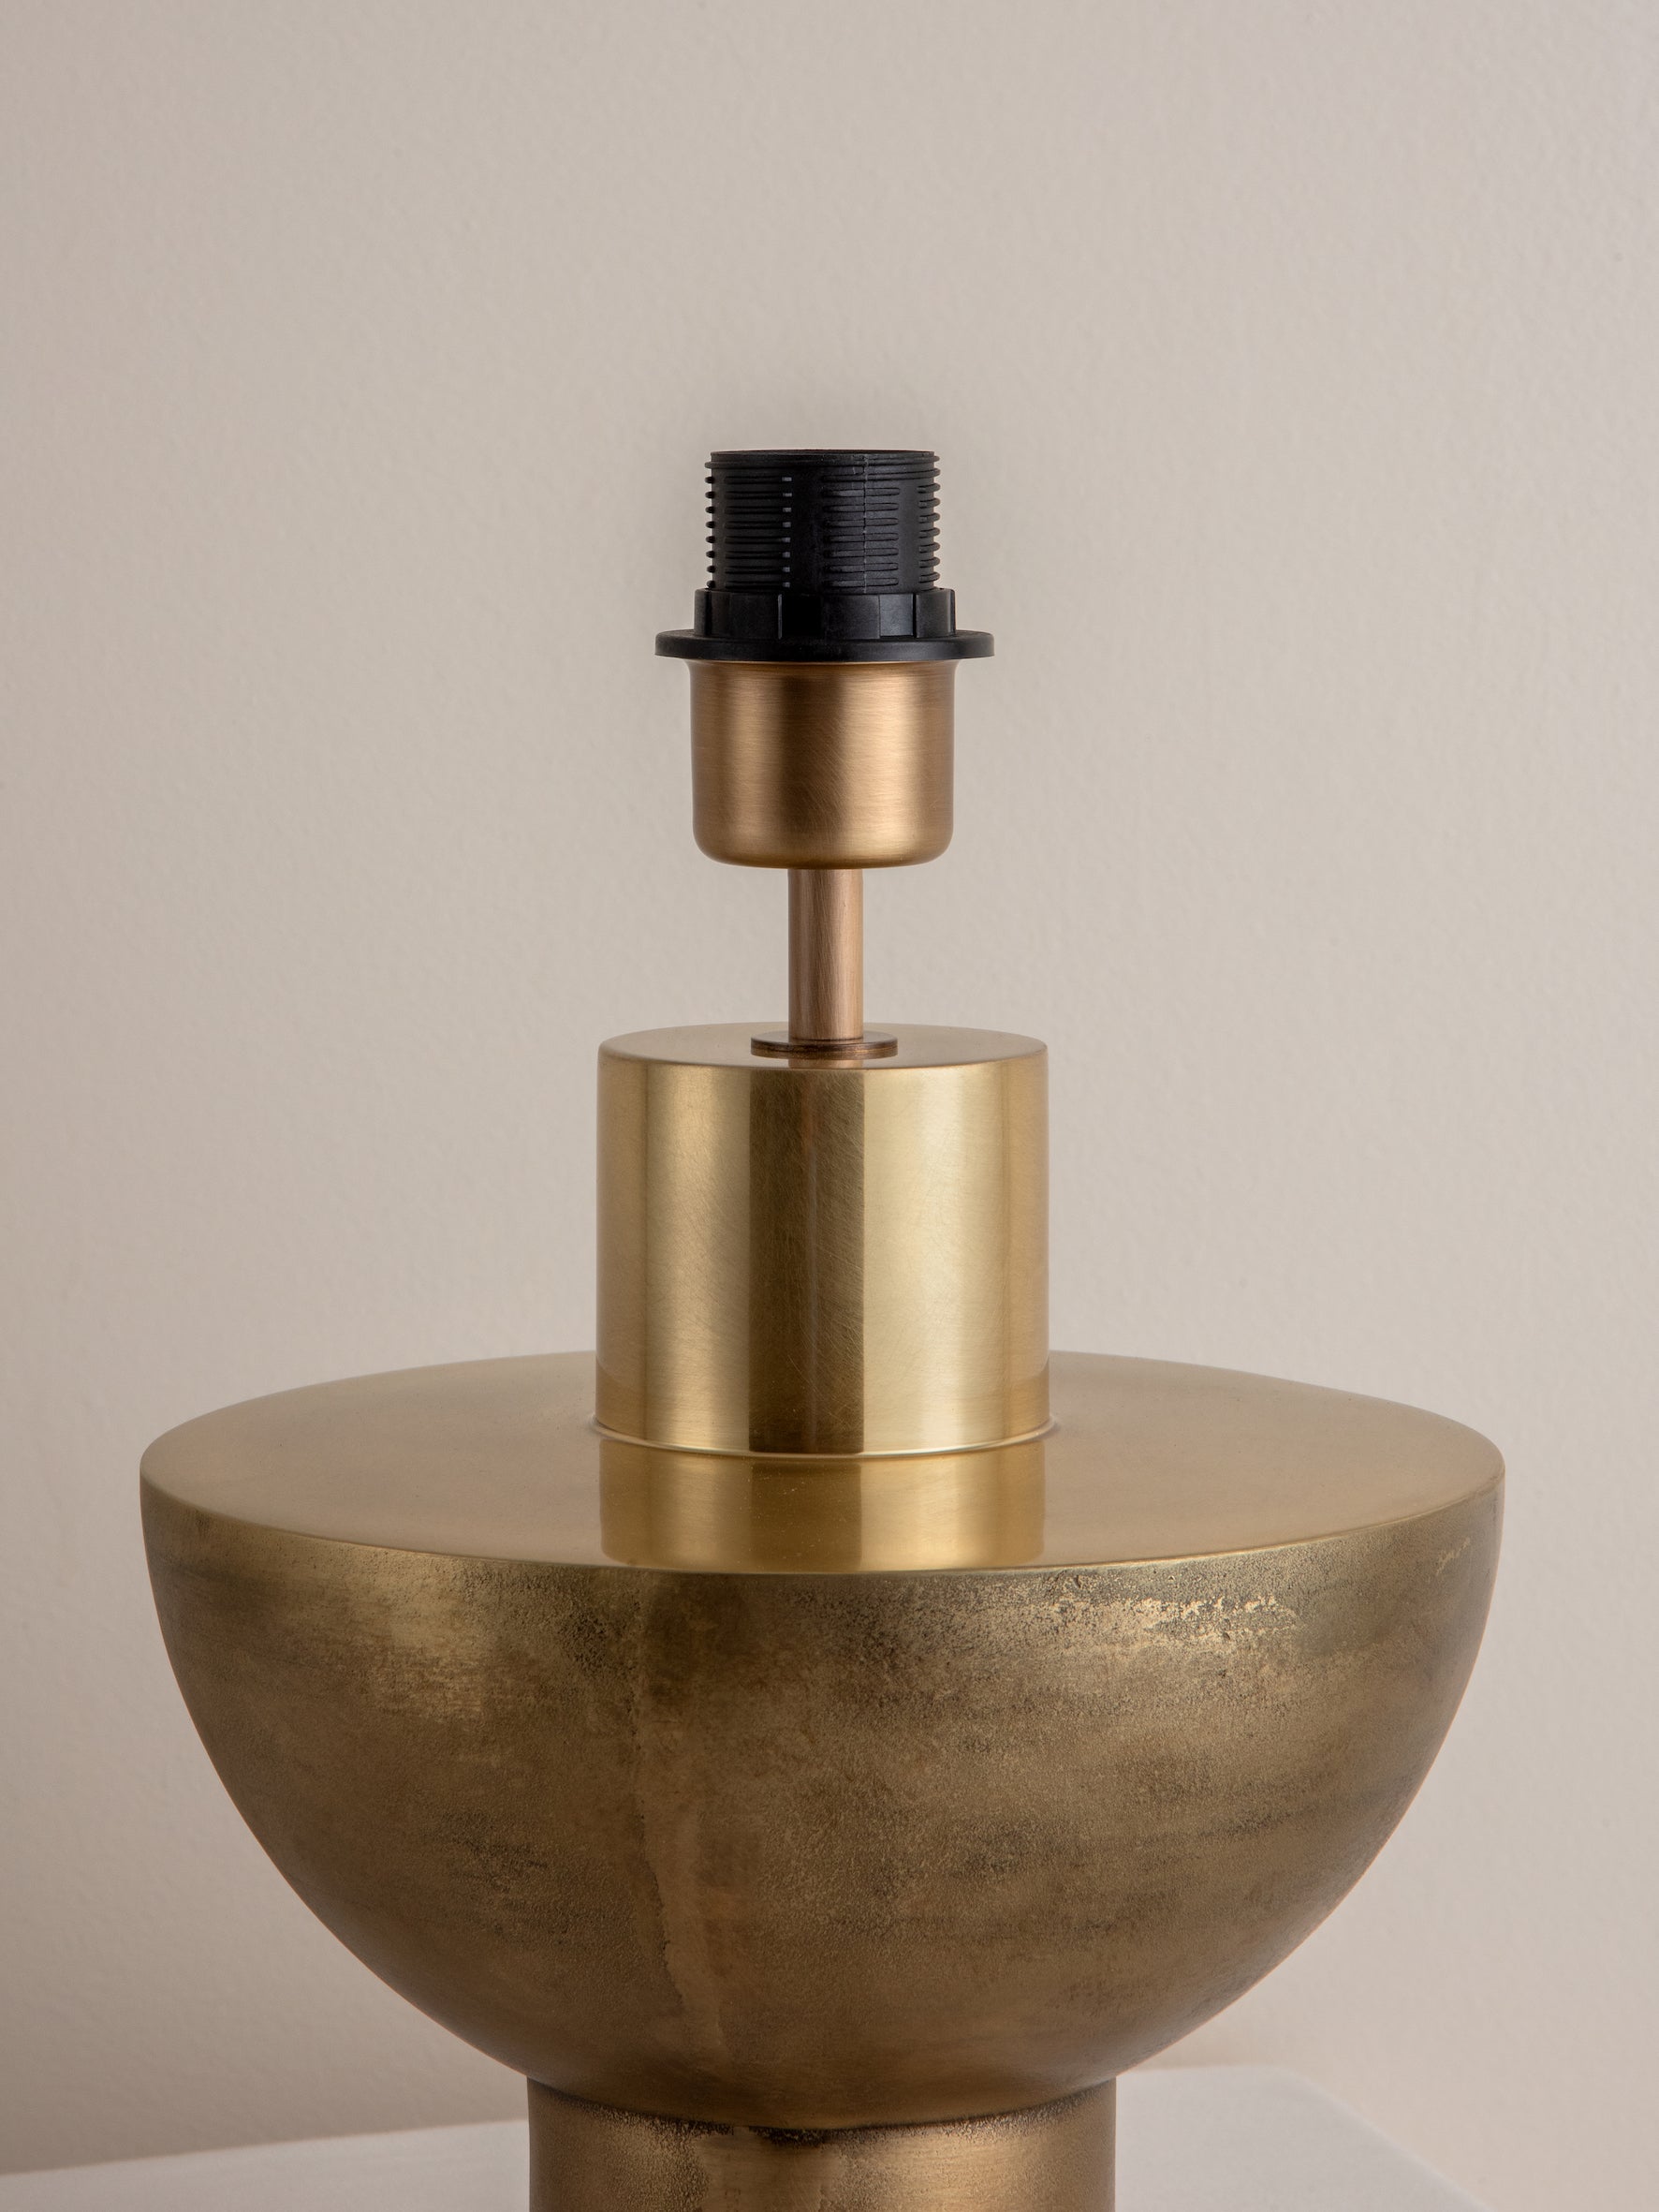 Editions brass lamp with + plaster shade | Table Lamp | Lights & Lamps | UK | Modern Affordable Designer Lighting